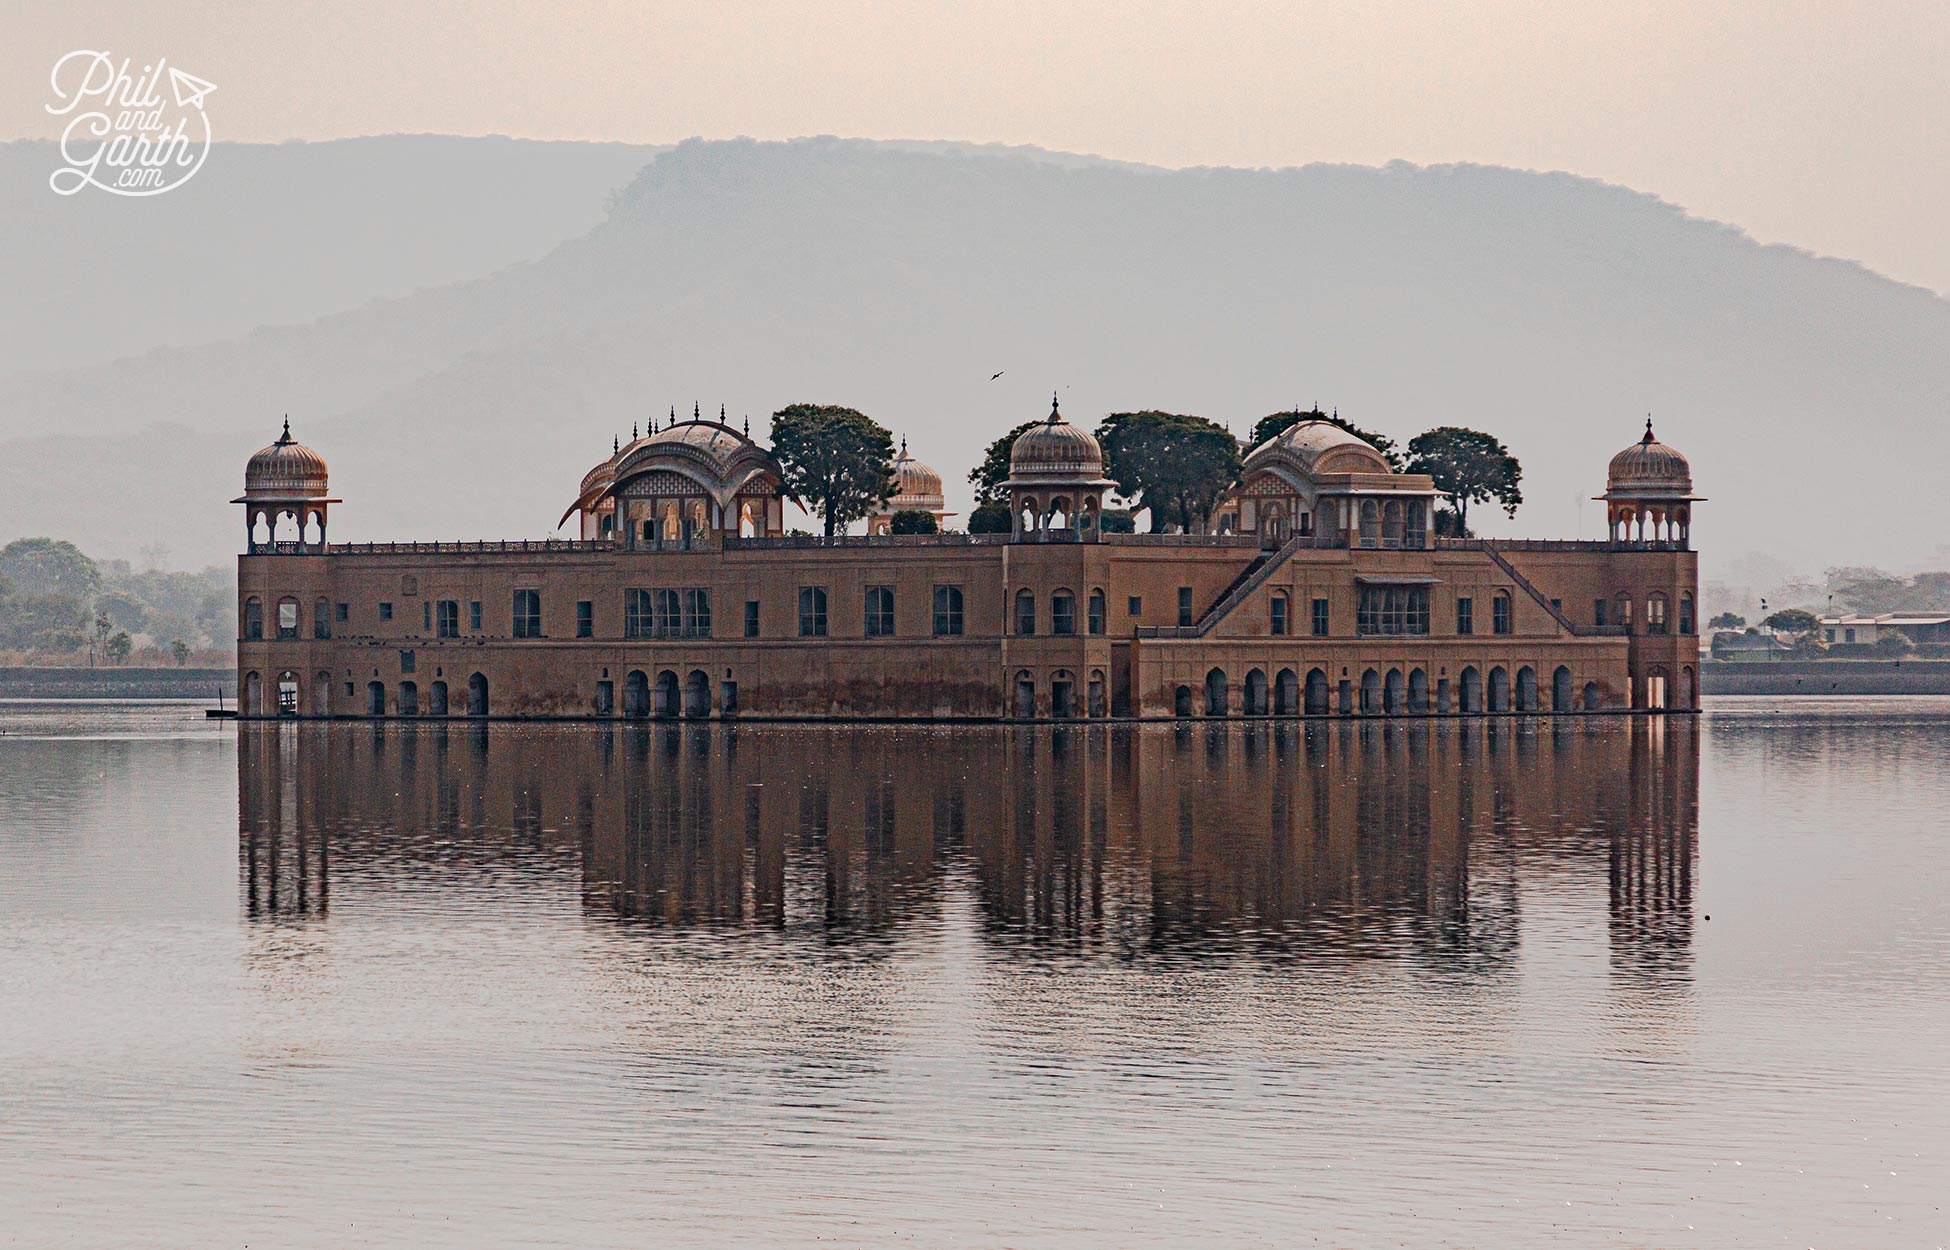 Jal Mahal - photo taken on the way back to Jaipur after visiting Amber Fort